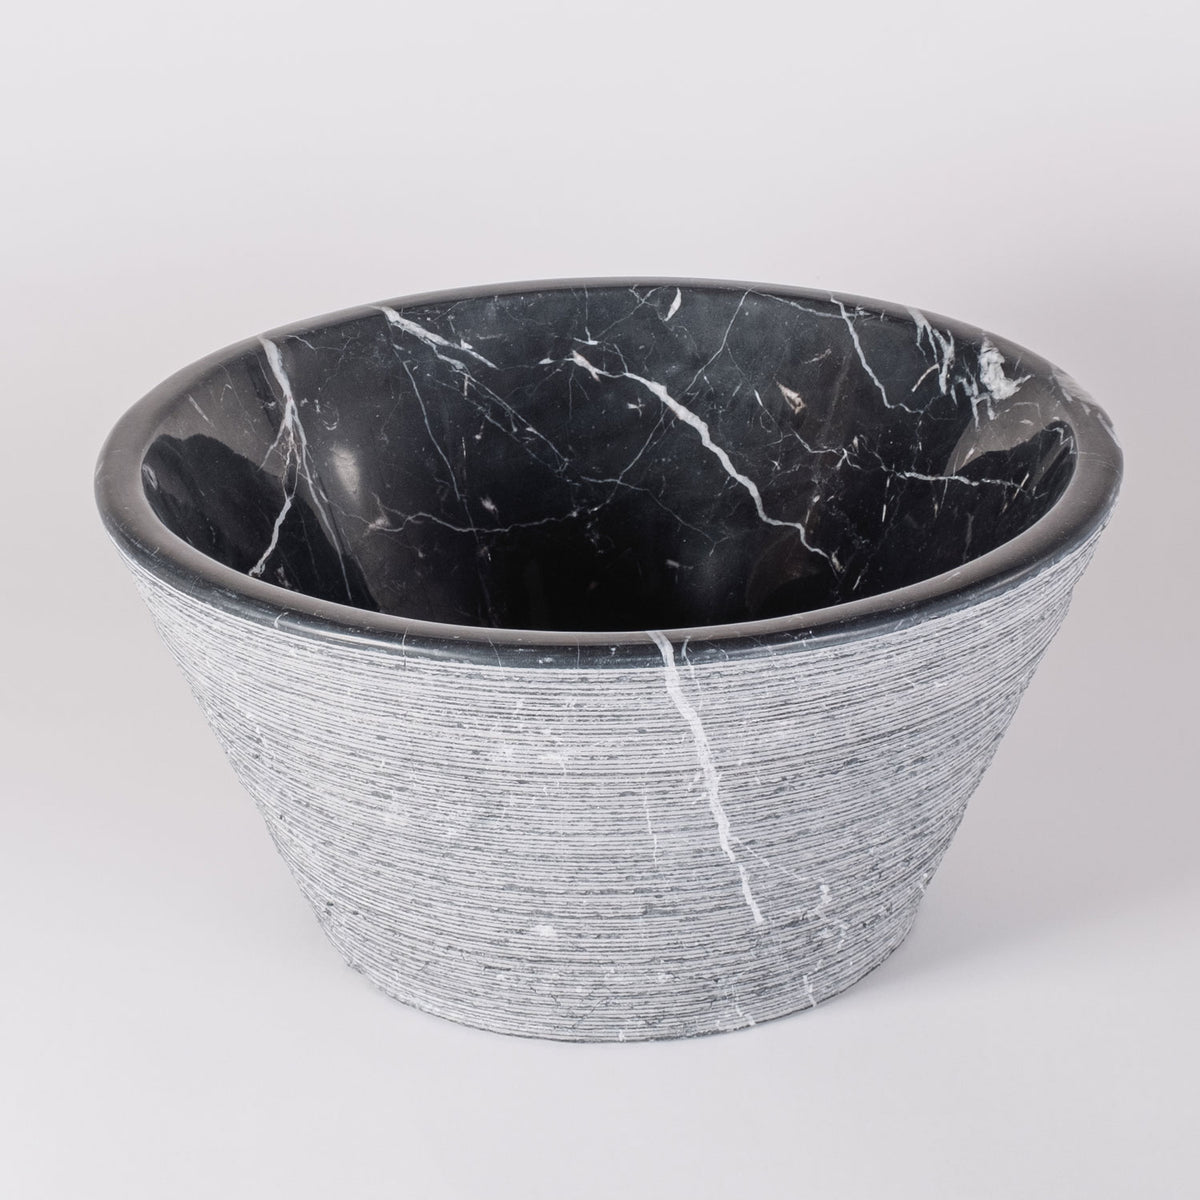 Stone Forest Cono Vessel Sink carved from Nero Marquina image 2 of 3